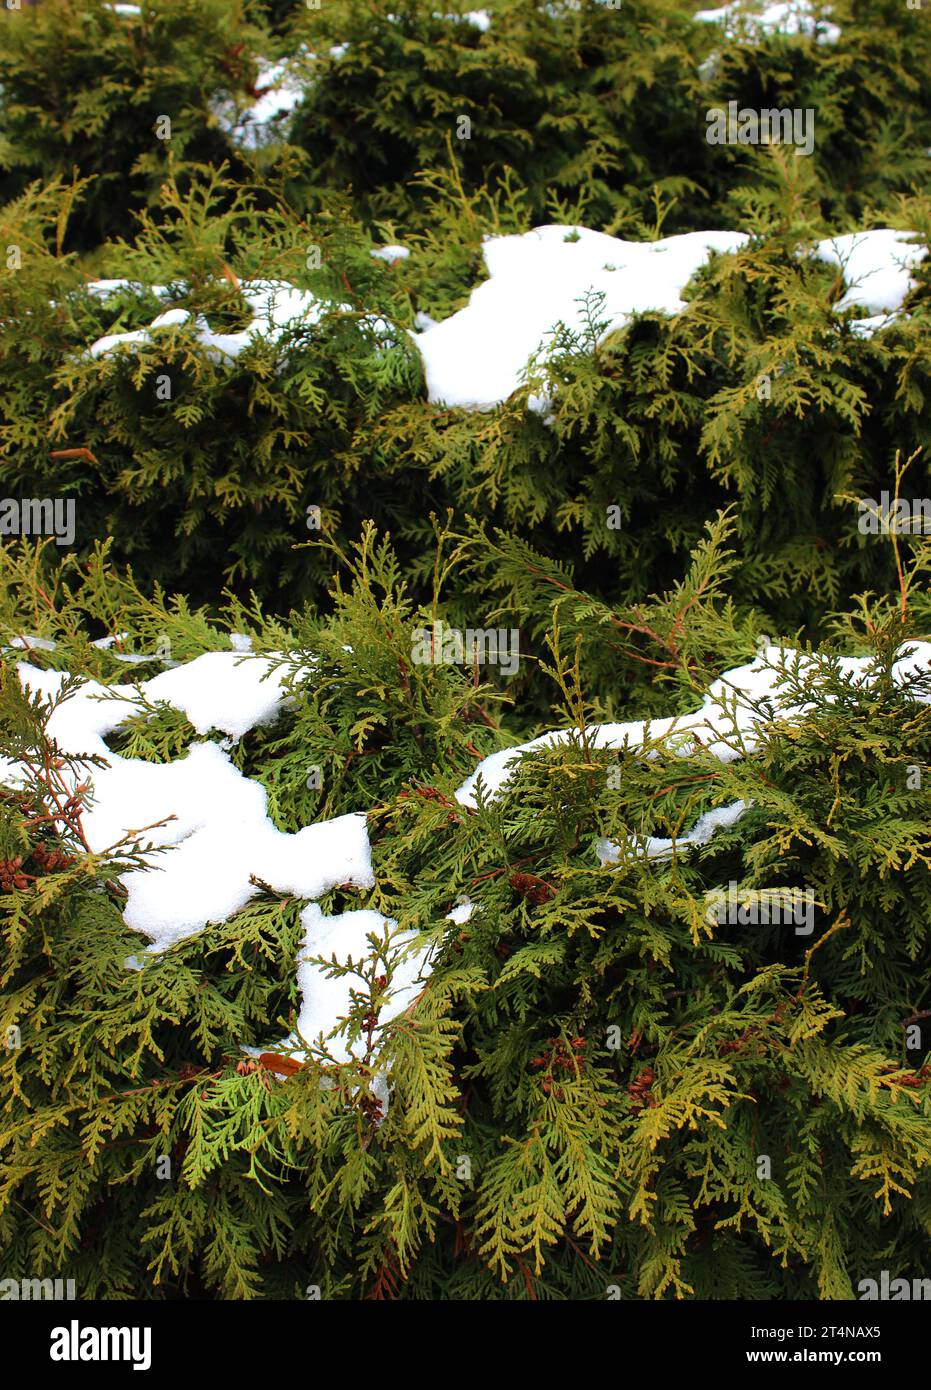 Thuja bushes trimmed in the form of steps covered with snow stock photo for vertical background Stock Photo